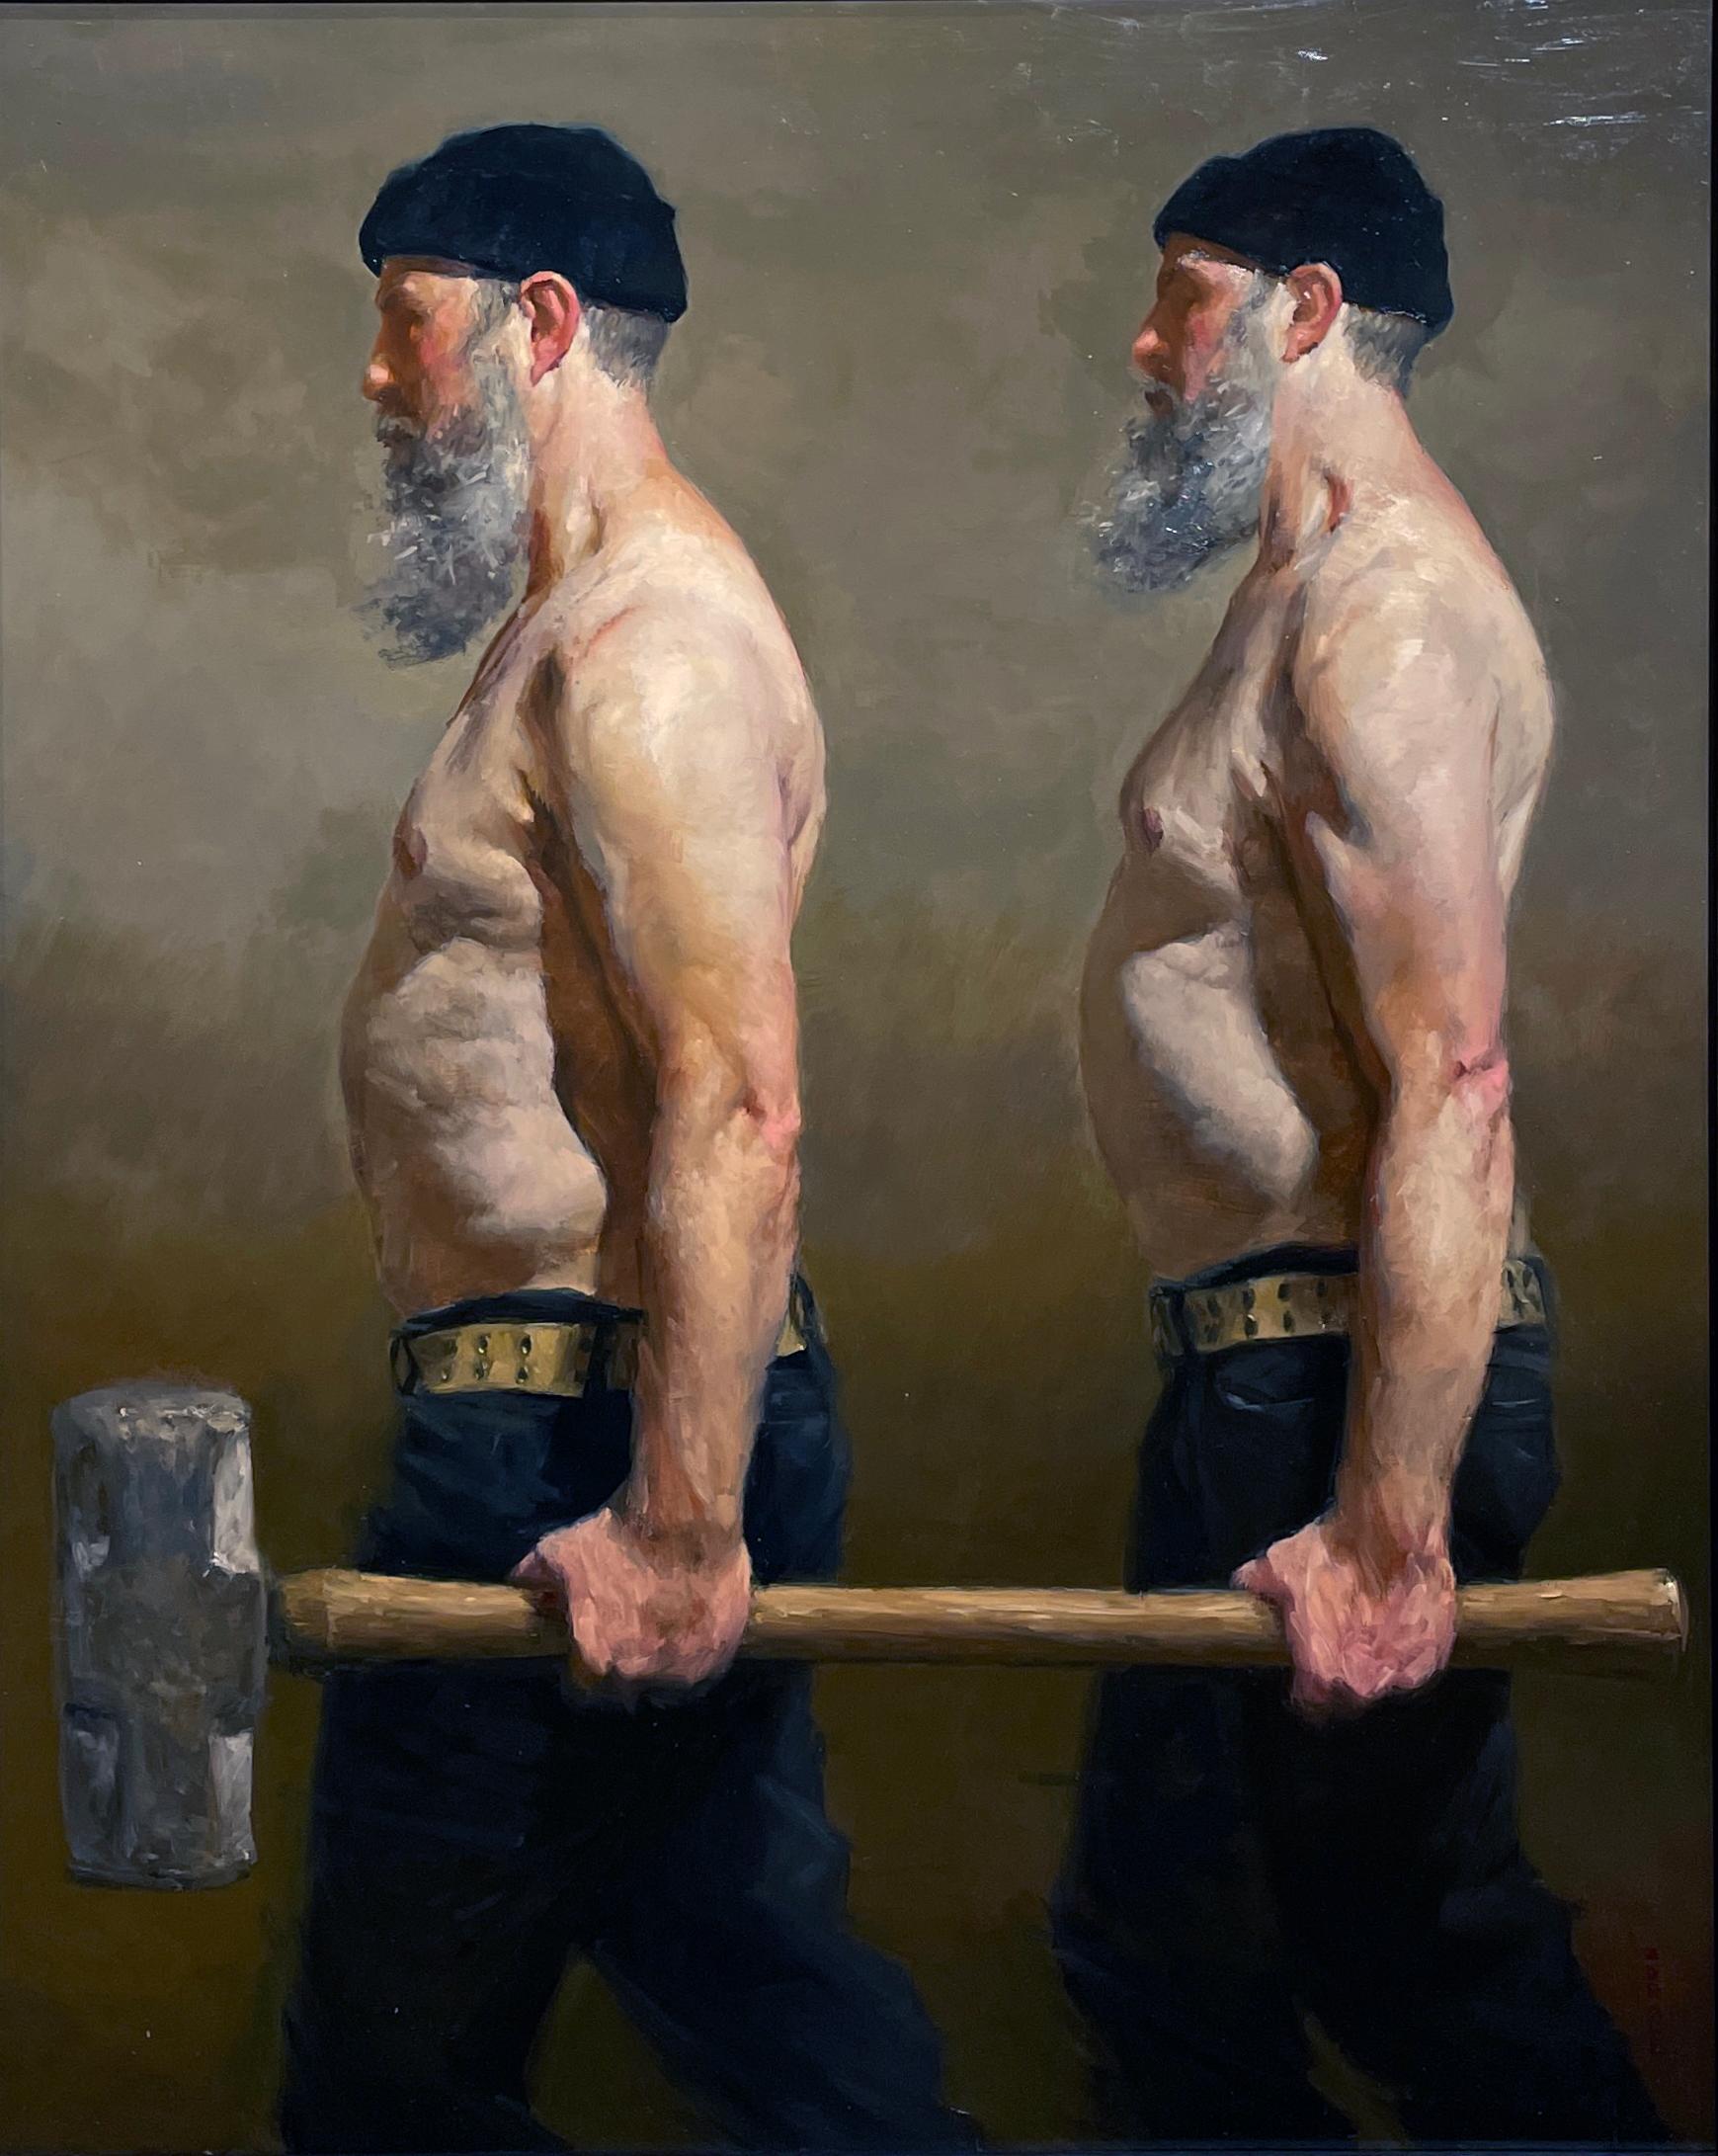 Zack Zdrale Figurative Painting - Sledge Bearers, Two Men Holding a Sledge Hammer, Original Oil on Panel